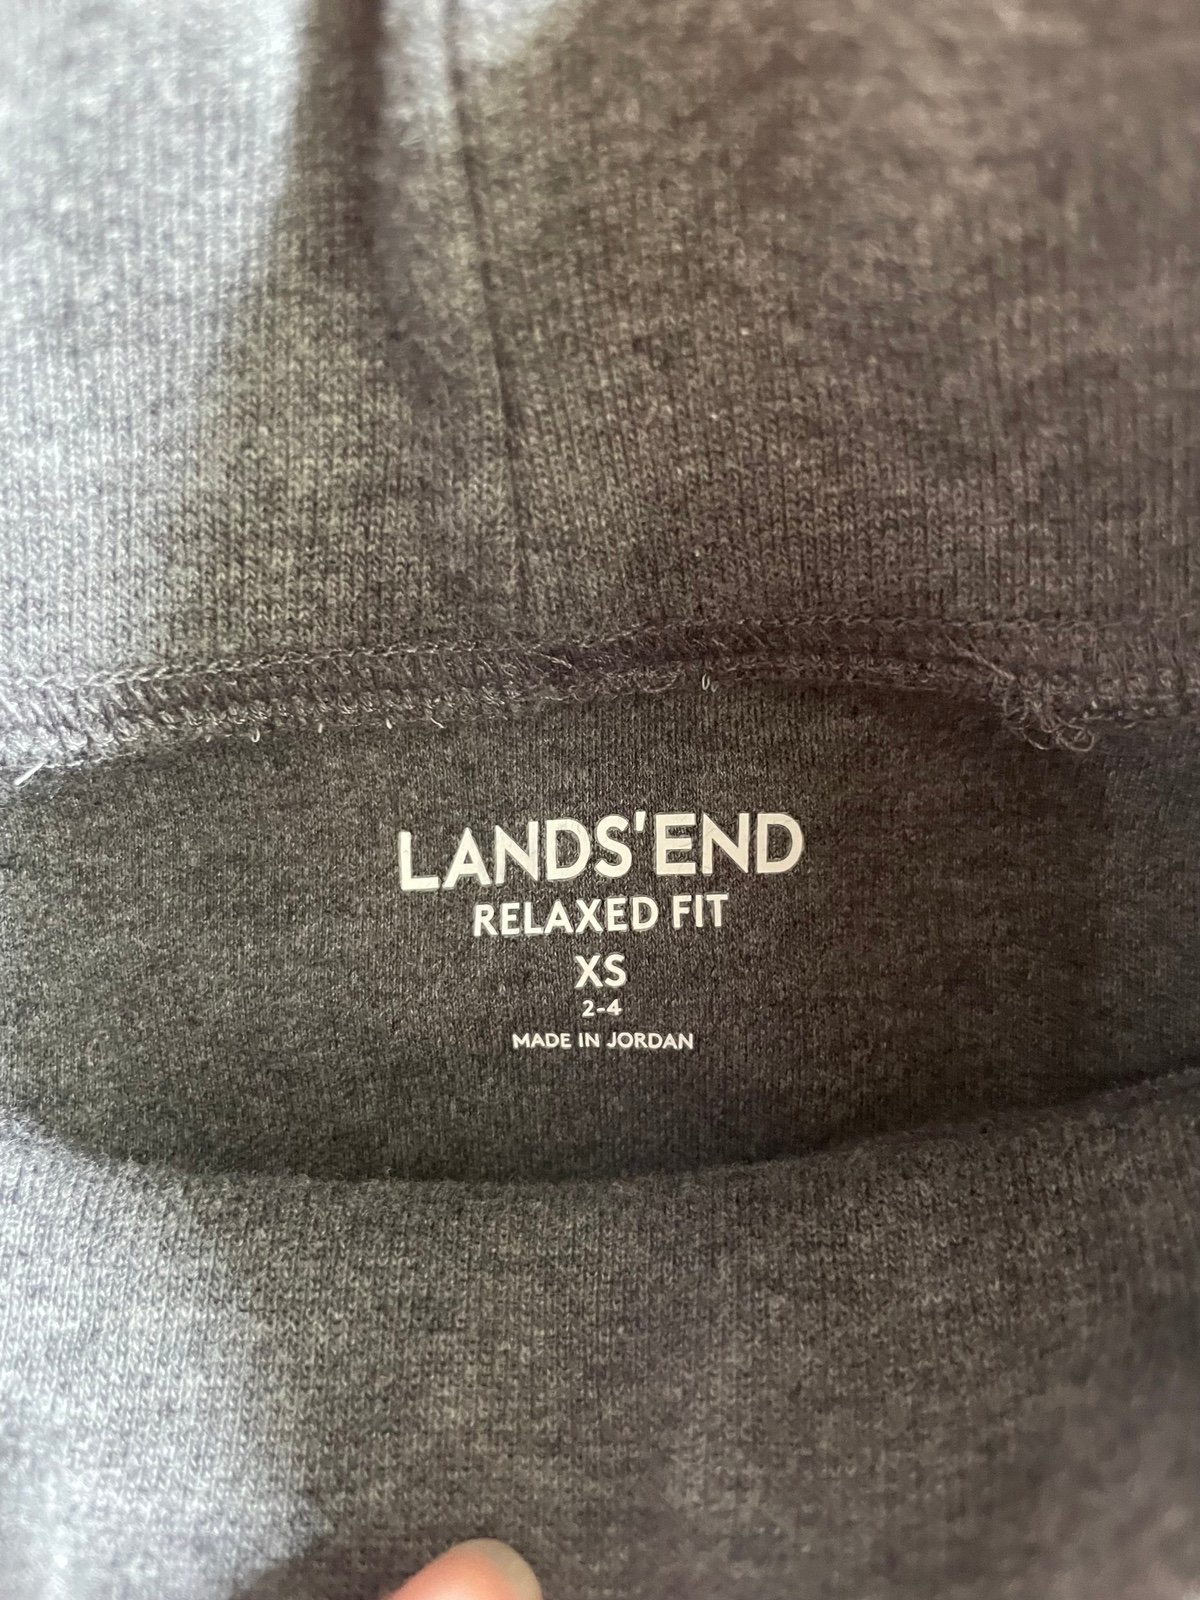 the Lowest price Women’s Land’s End Relaxed Fit Grey Turtleneck Top XS P0yiWTsAf no tax